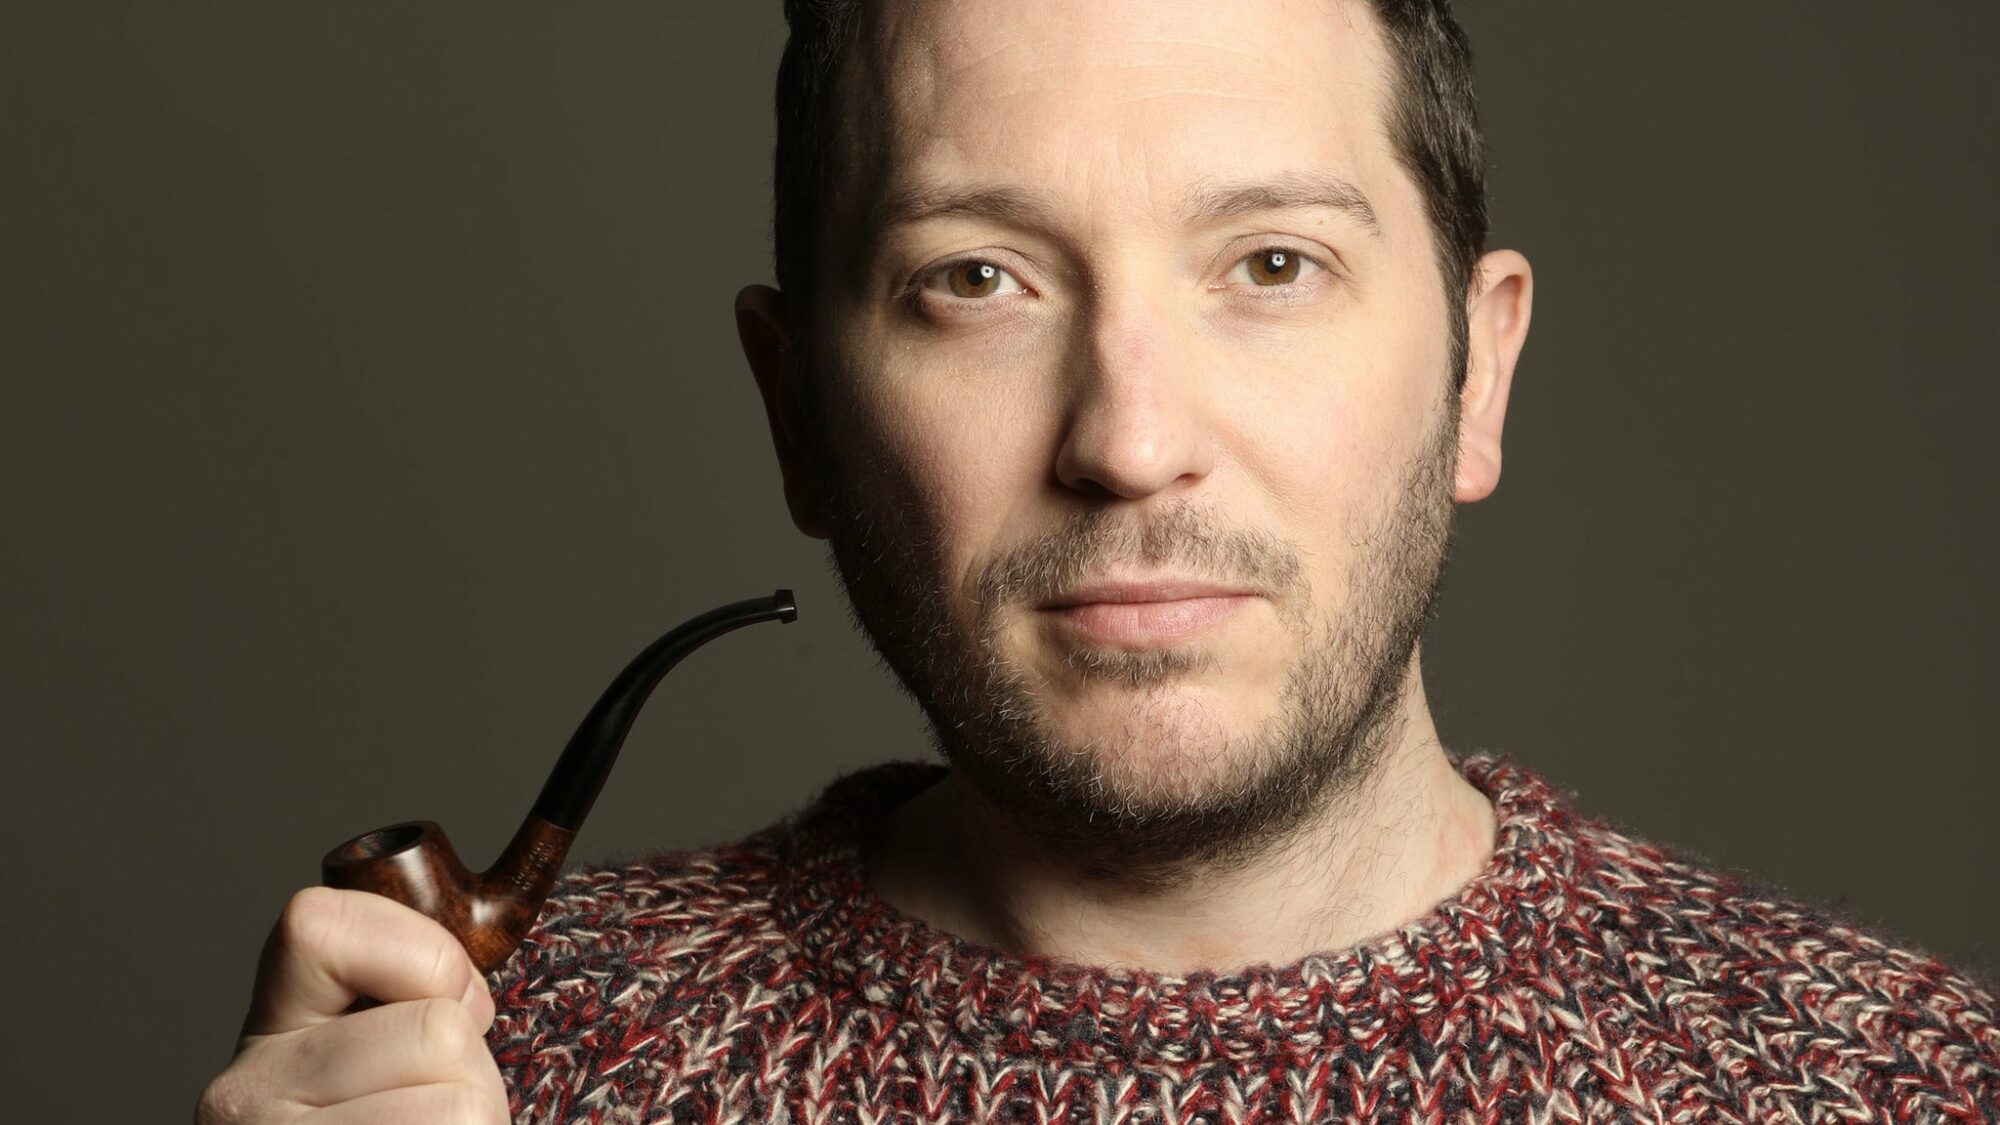 Image name Jon Richardson The Knitwit at Leeds Grand Theatre Leeds the 23 image from the post What’s on next week? From Monday 25th September in Yorkshire.com.